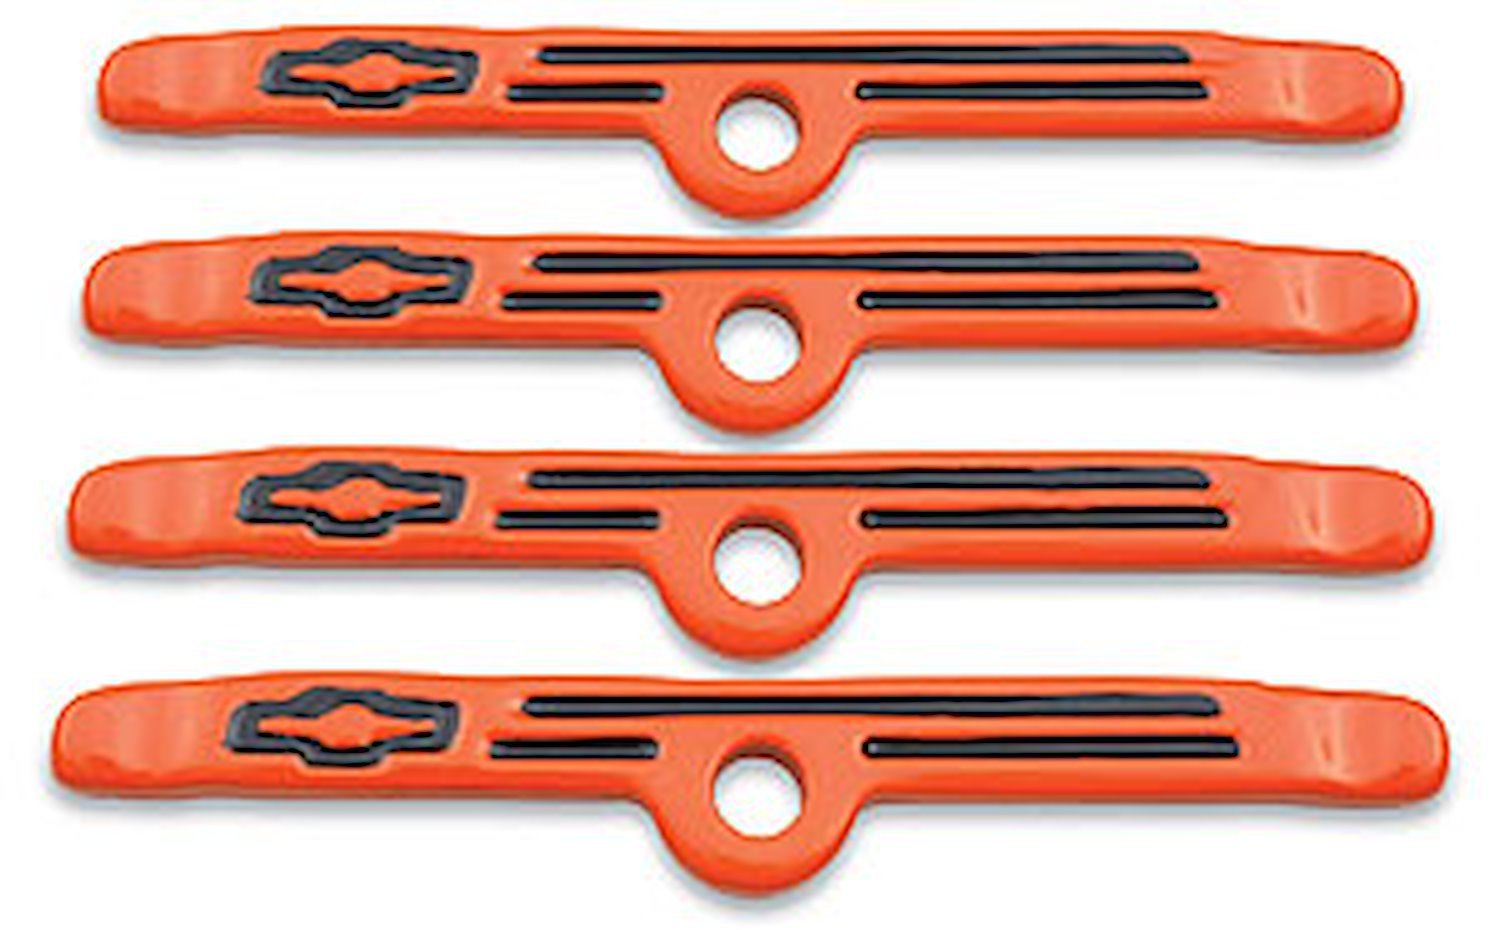 Bowtie Valve Cover Hold-Down Clamps for 1958-1986 Small Block Chevy & V6/90 in Chevy Orange Finish with Black Emblem